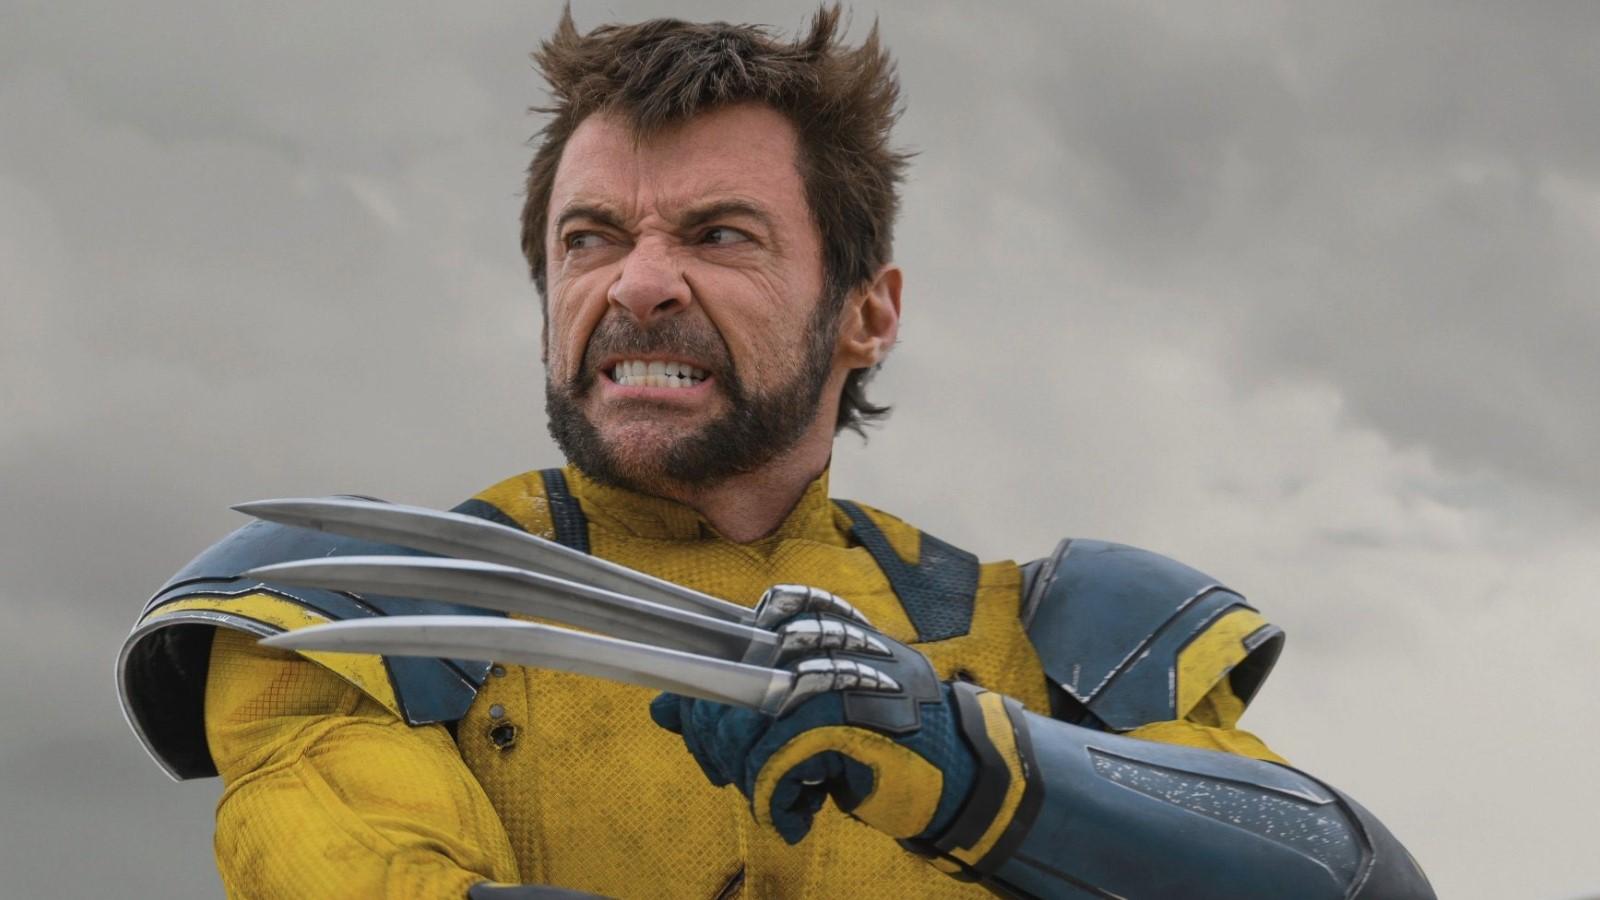 Hugh Jackman as Wolverine in Deadpool & Wolverine, with his claws out